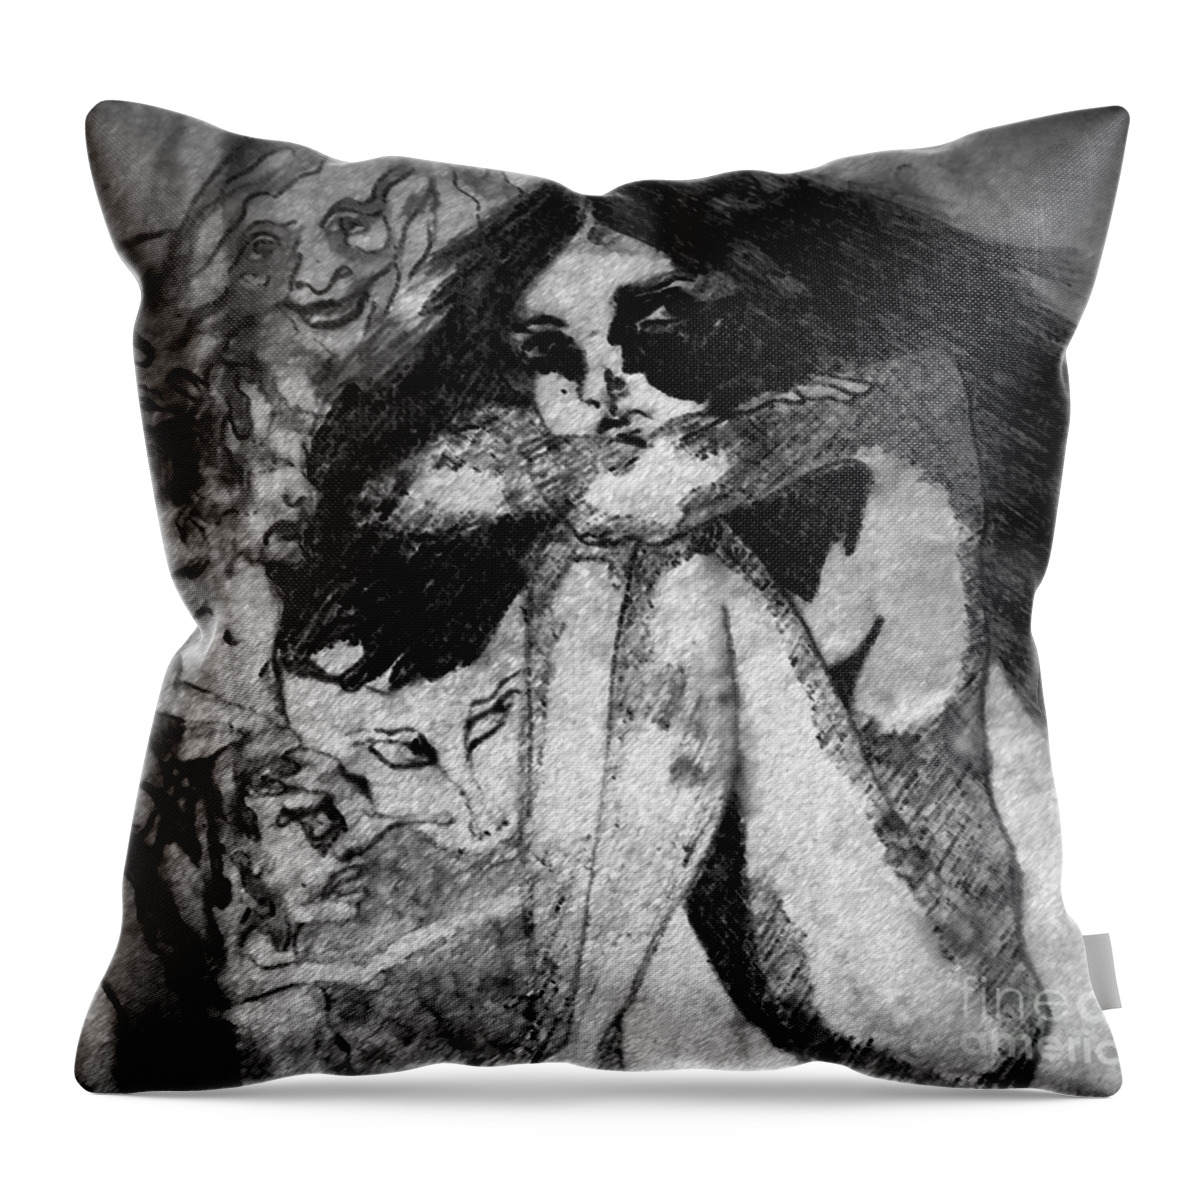 Charcoal Sketch Throw Pillow featuring the pastel Flash Black by Kim Prowse